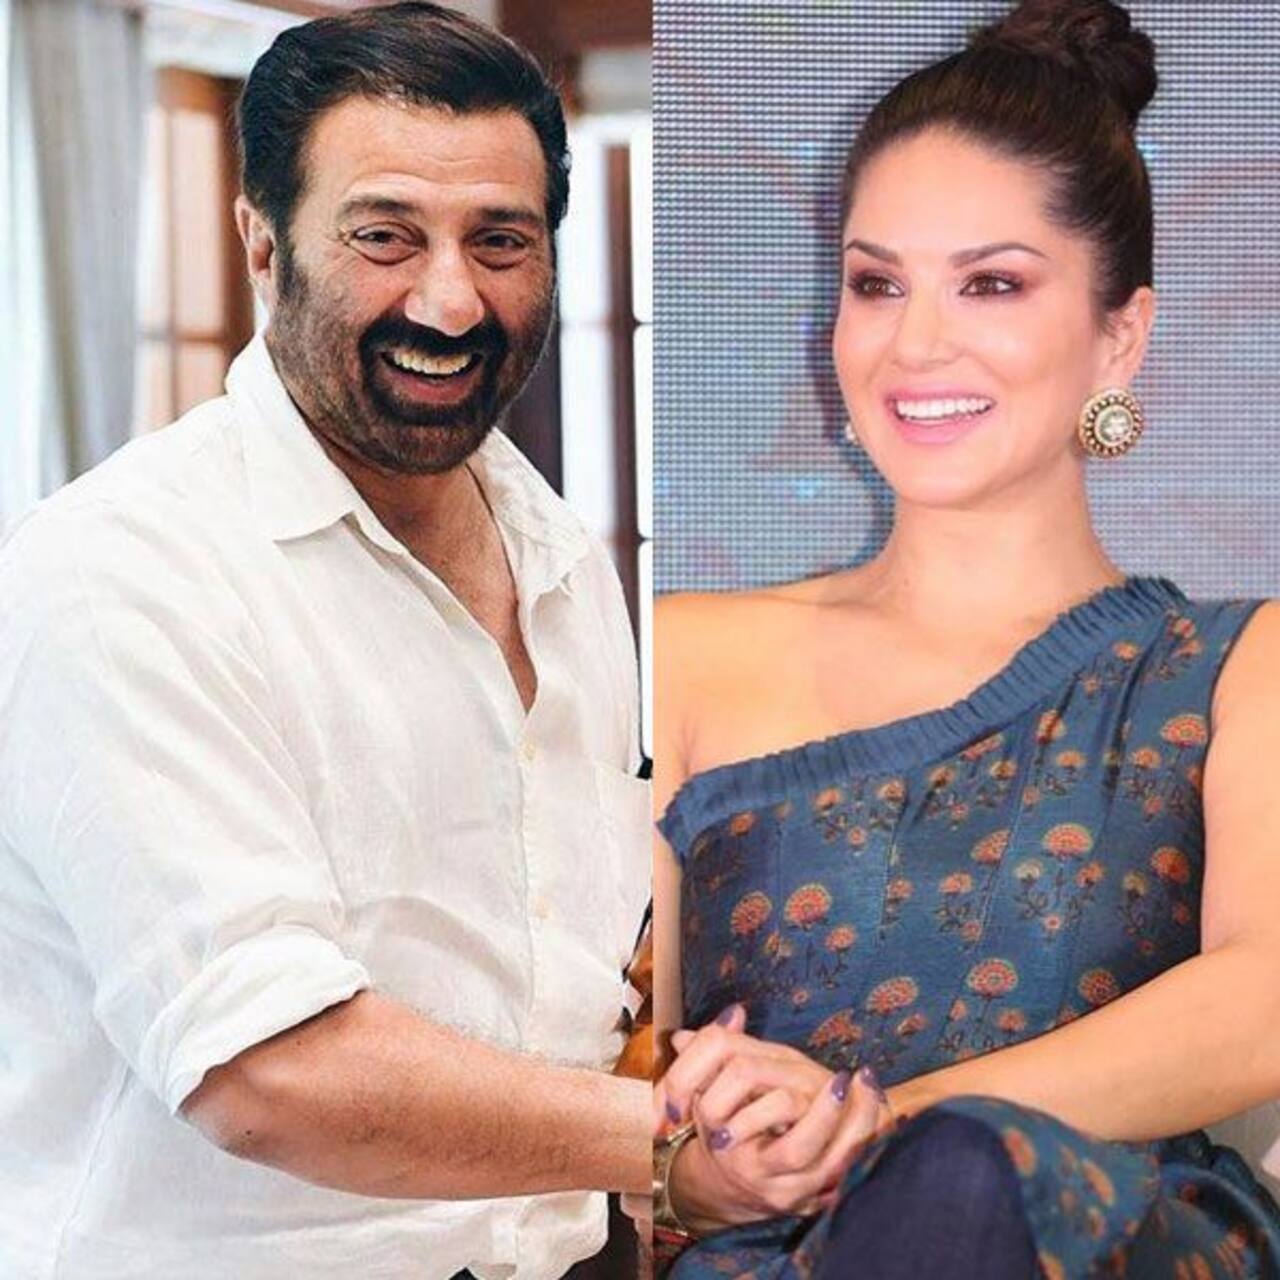 Lok Sabha Elections 2019: News anchor takes Sunny Leone's name instead of Sunny Deol's, and her response will make your day